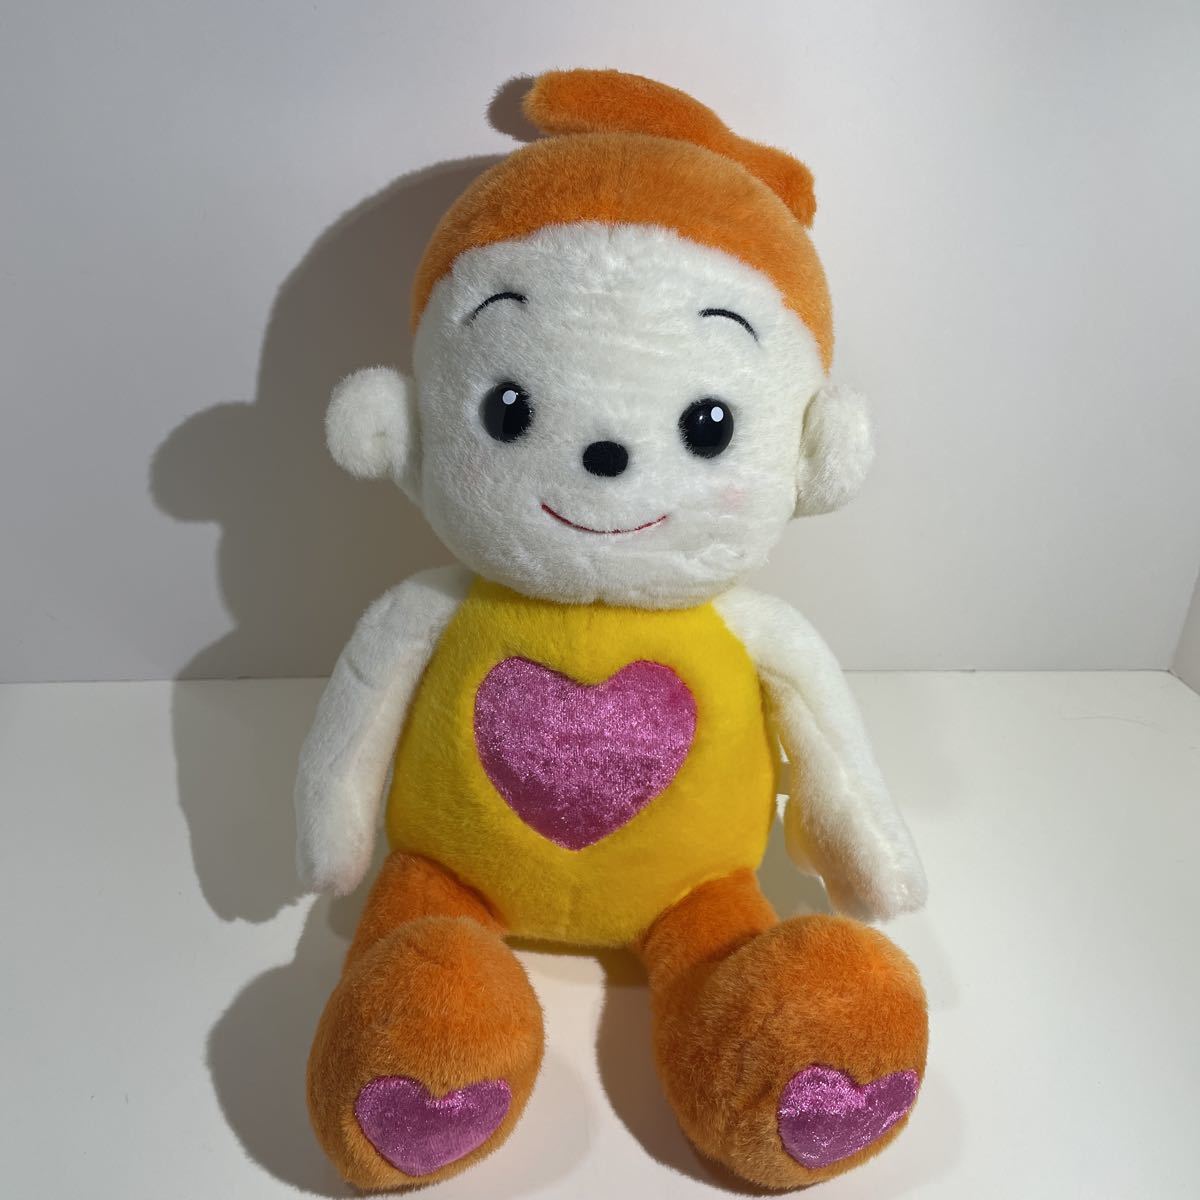  that time thing rare Bandai 1999 year first generation version Primo Puel yellow orange BANDAI PRIMOPUEL..... soft toy the first period model 